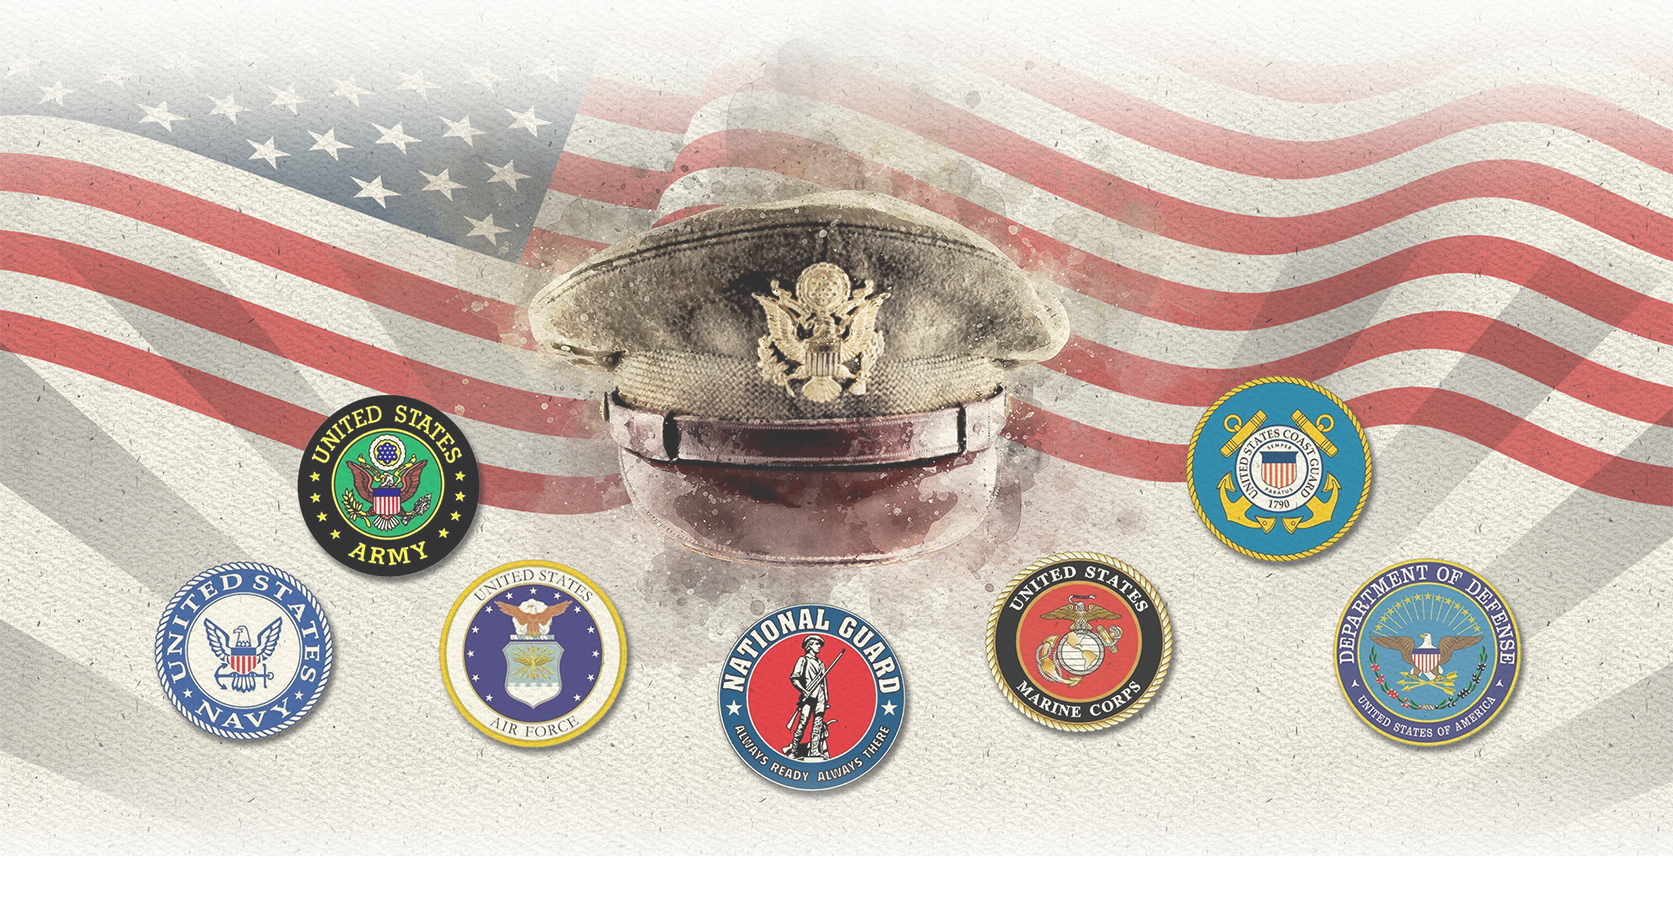 photo of military badges on american flag background